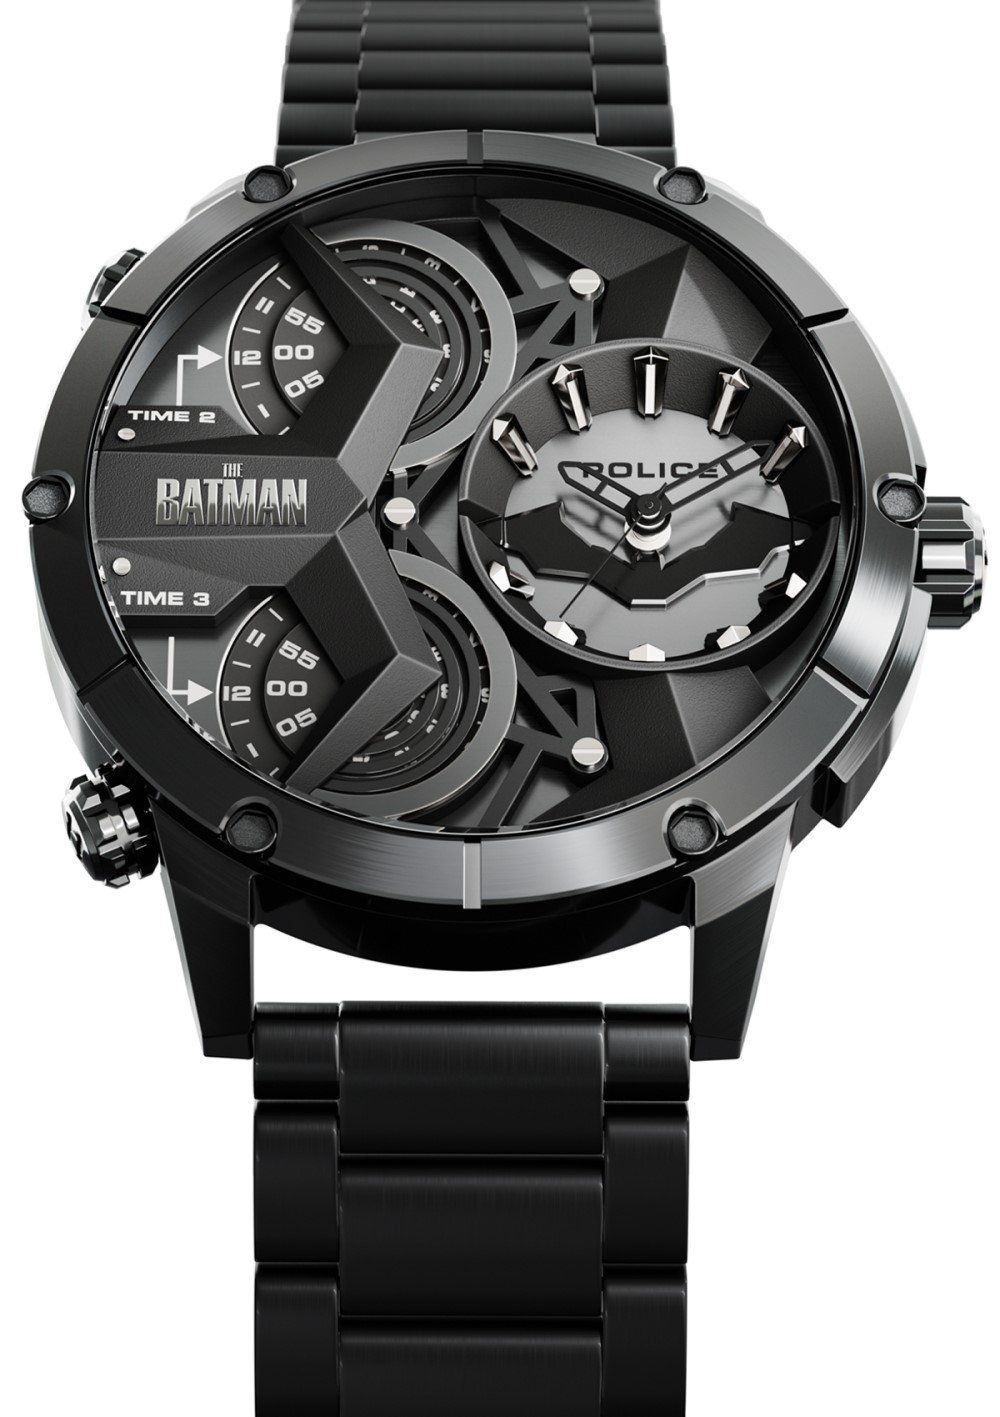 The Batman Vengeance Edition Watch By Police For Men